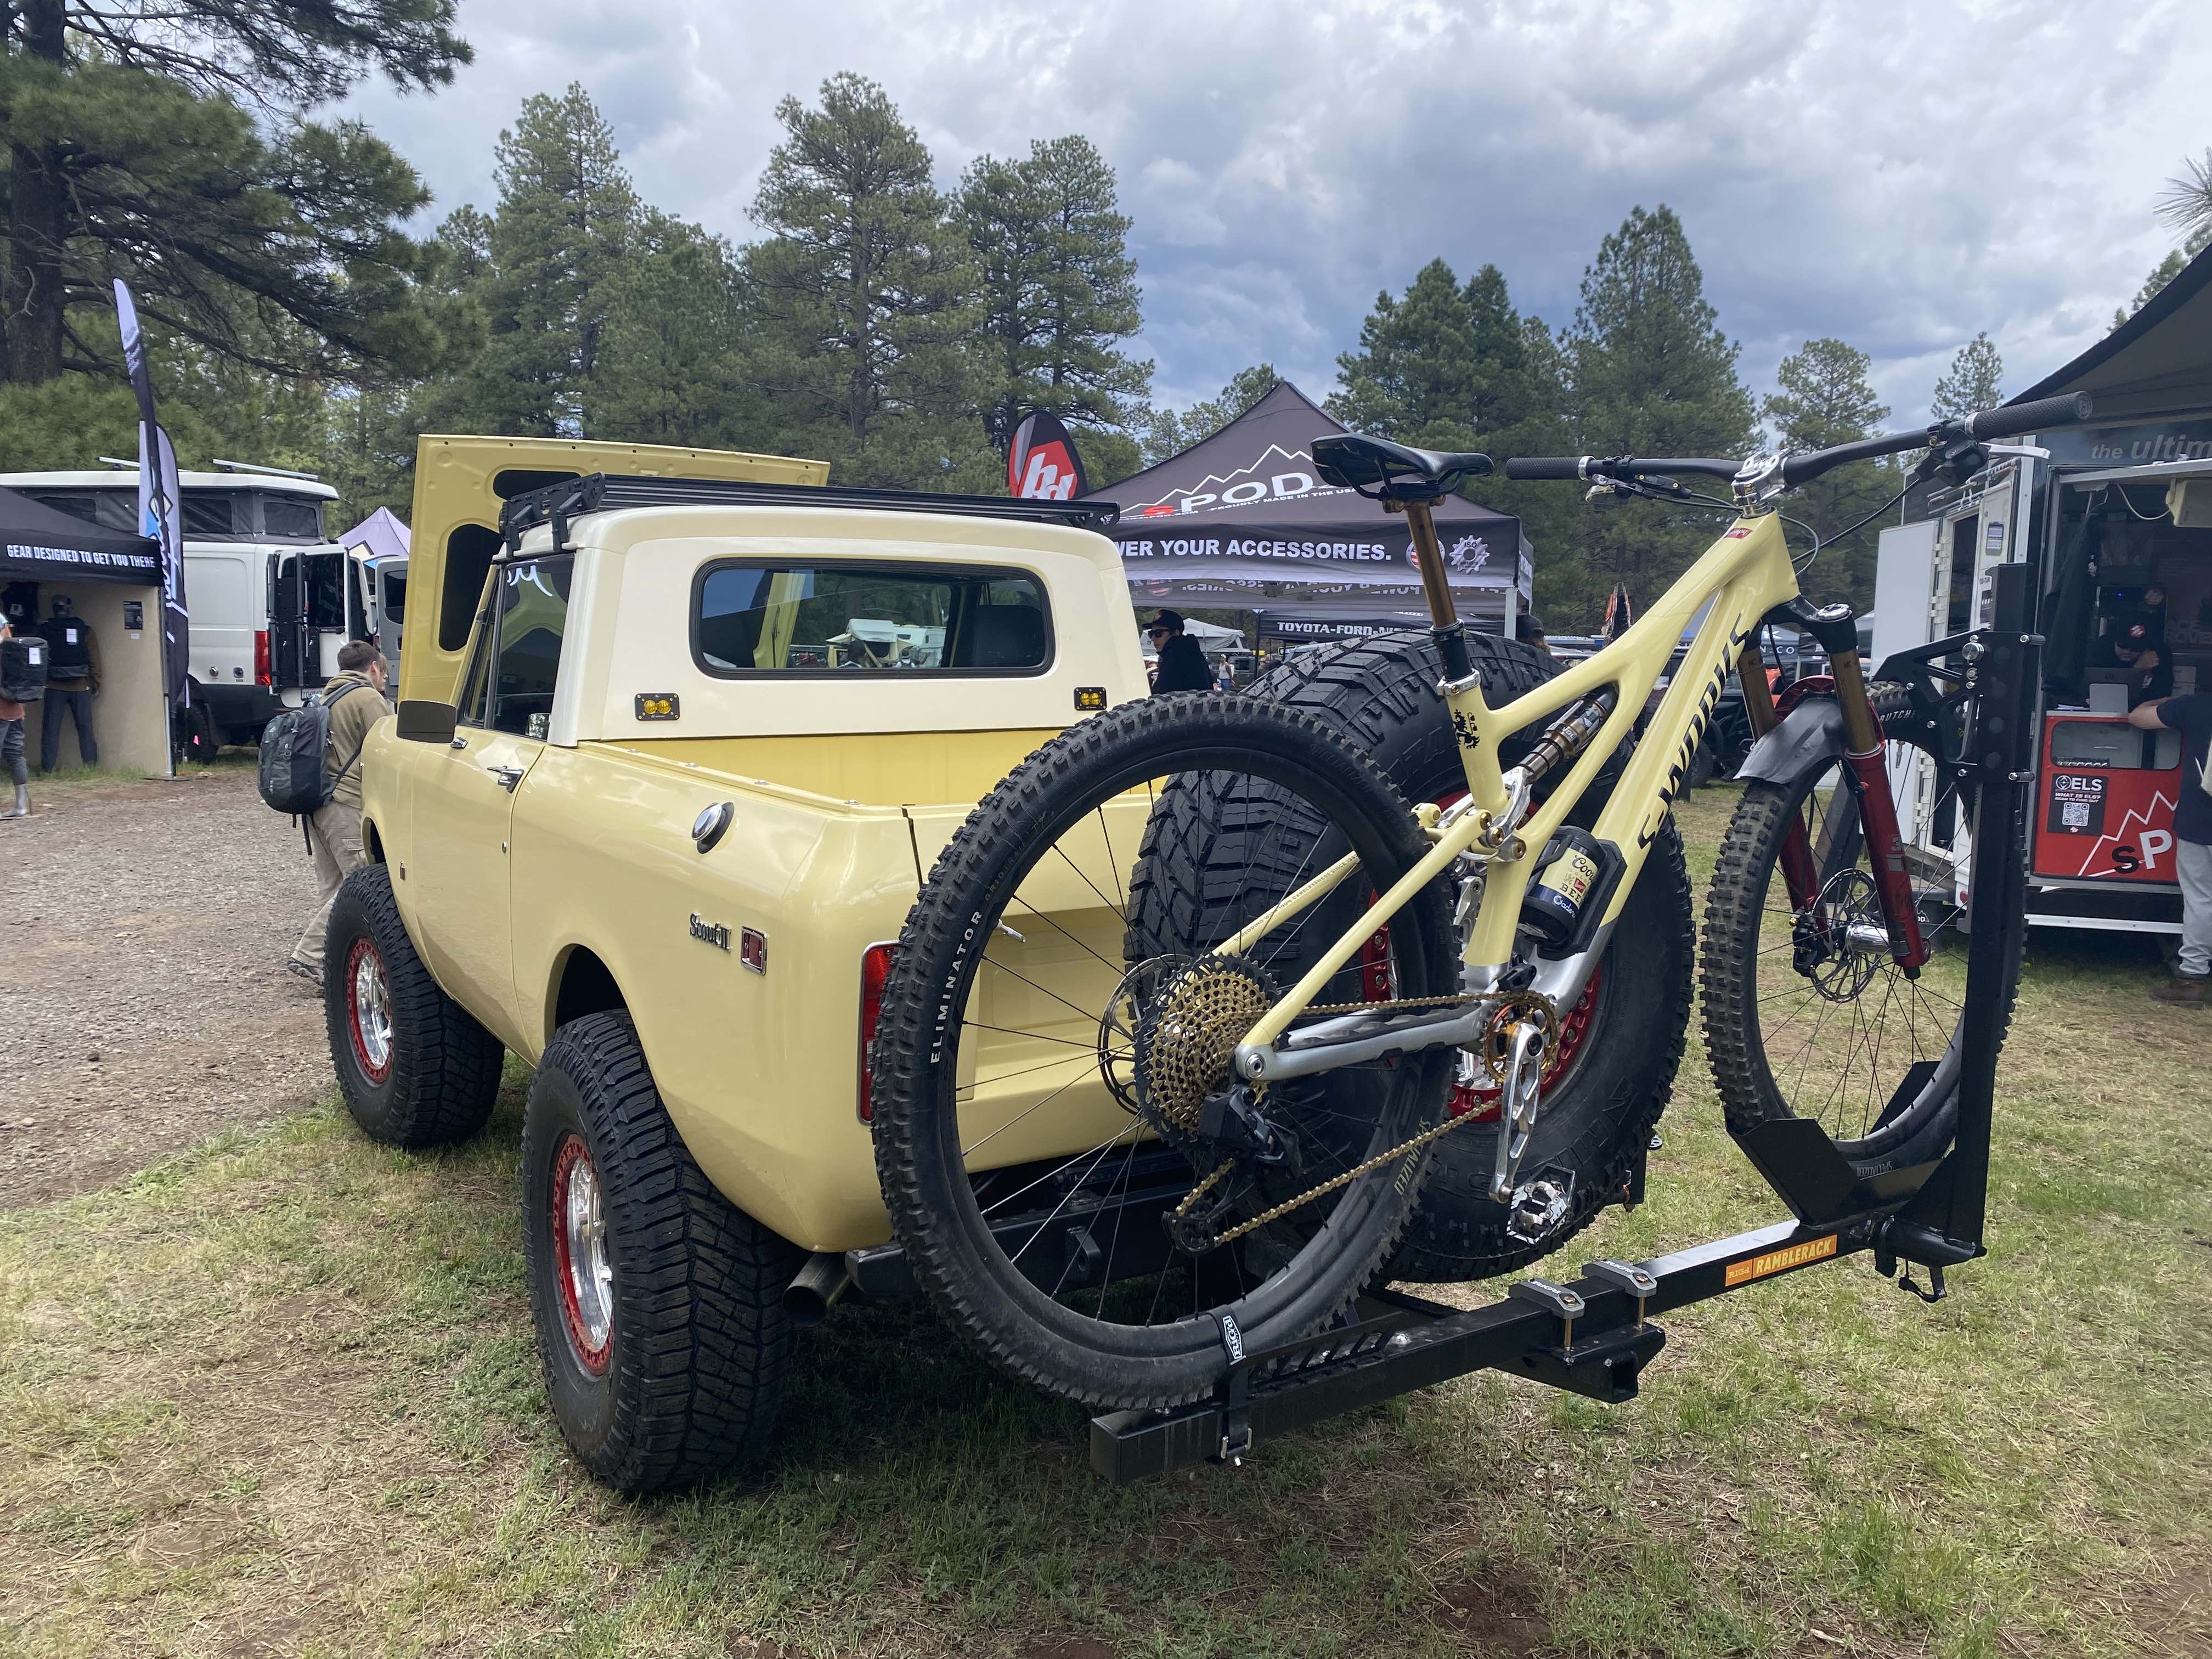 RUX at the Overland Expo in Flagstaff